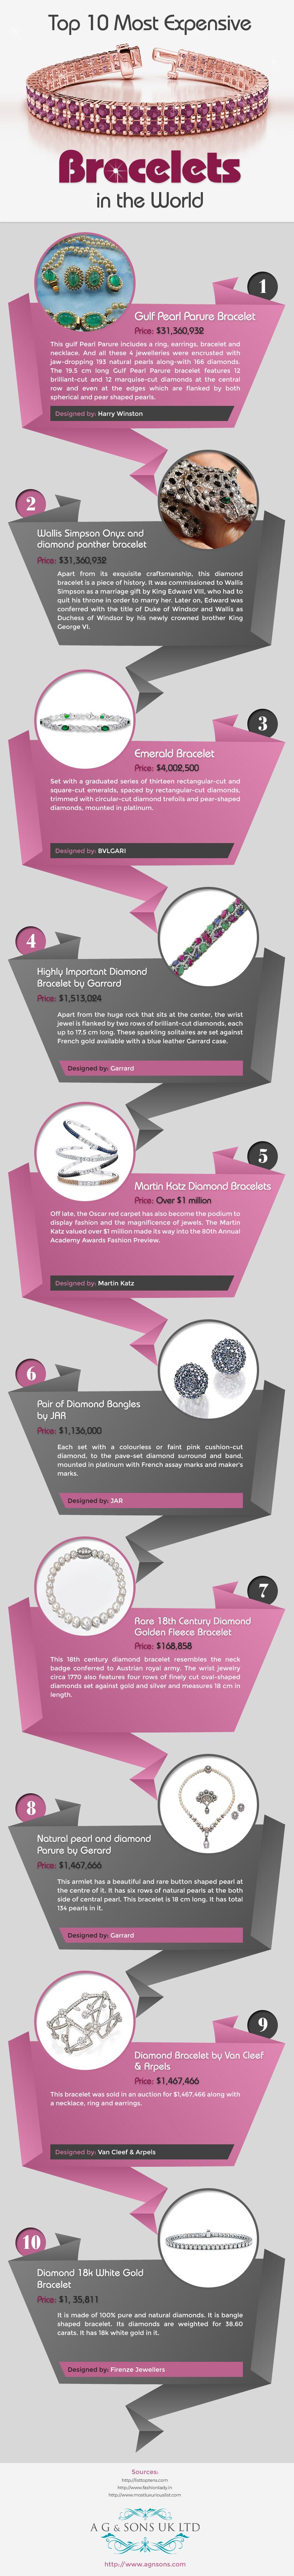 Hochzeit - Top 10 Most Expensive Bracelets in the World